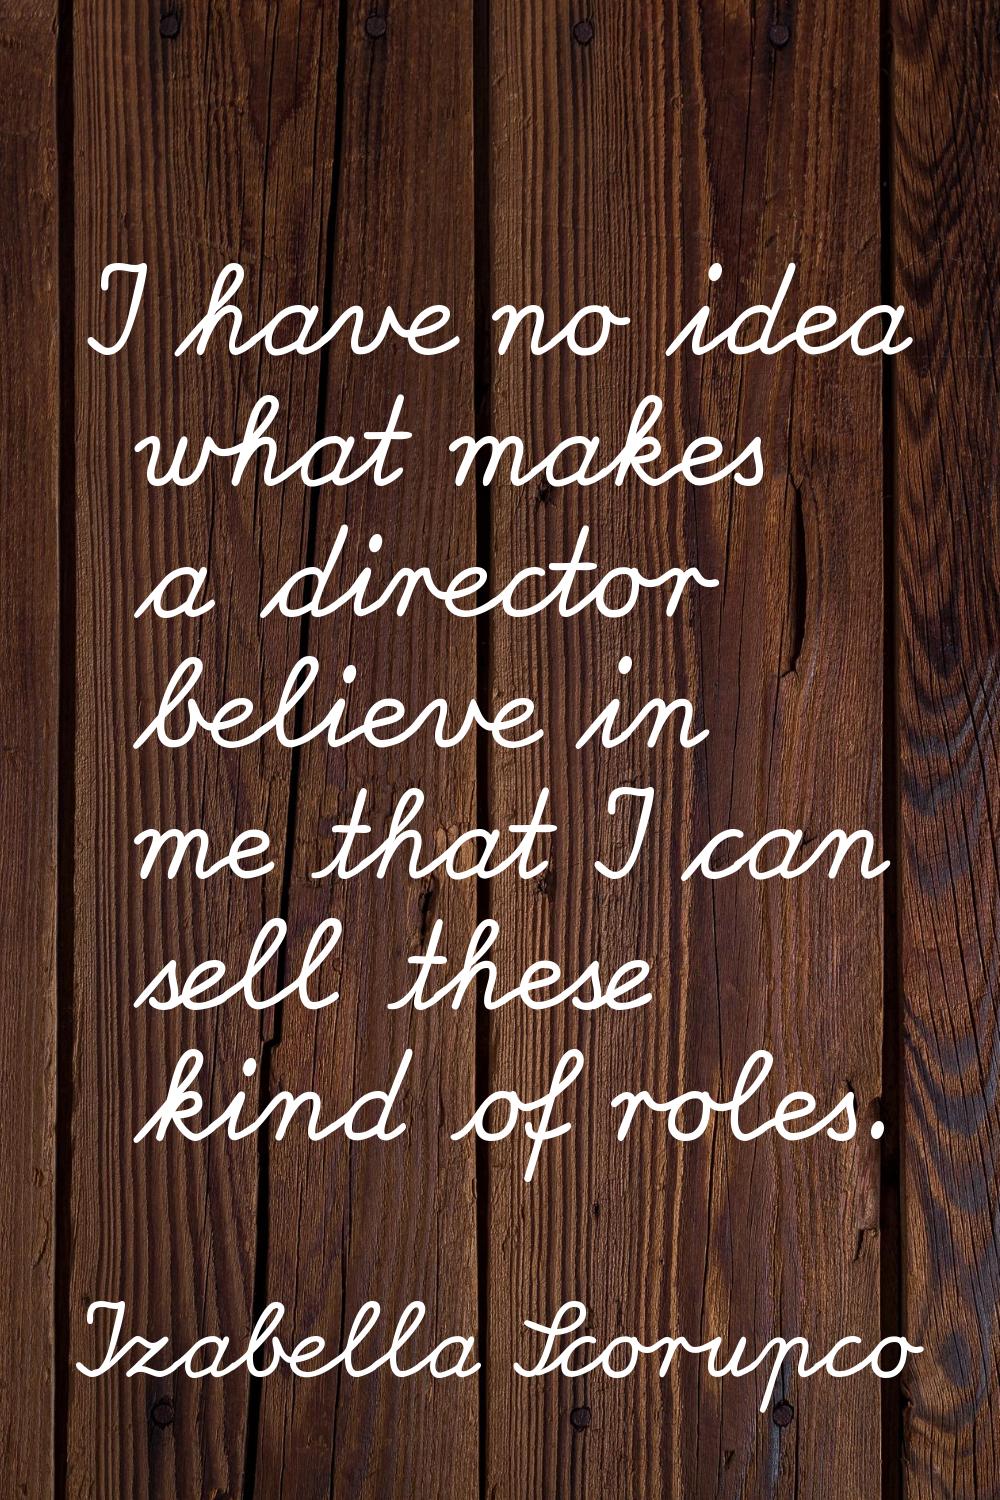 I have no idea what makes a director believe in me that I can sell these kind of roles.